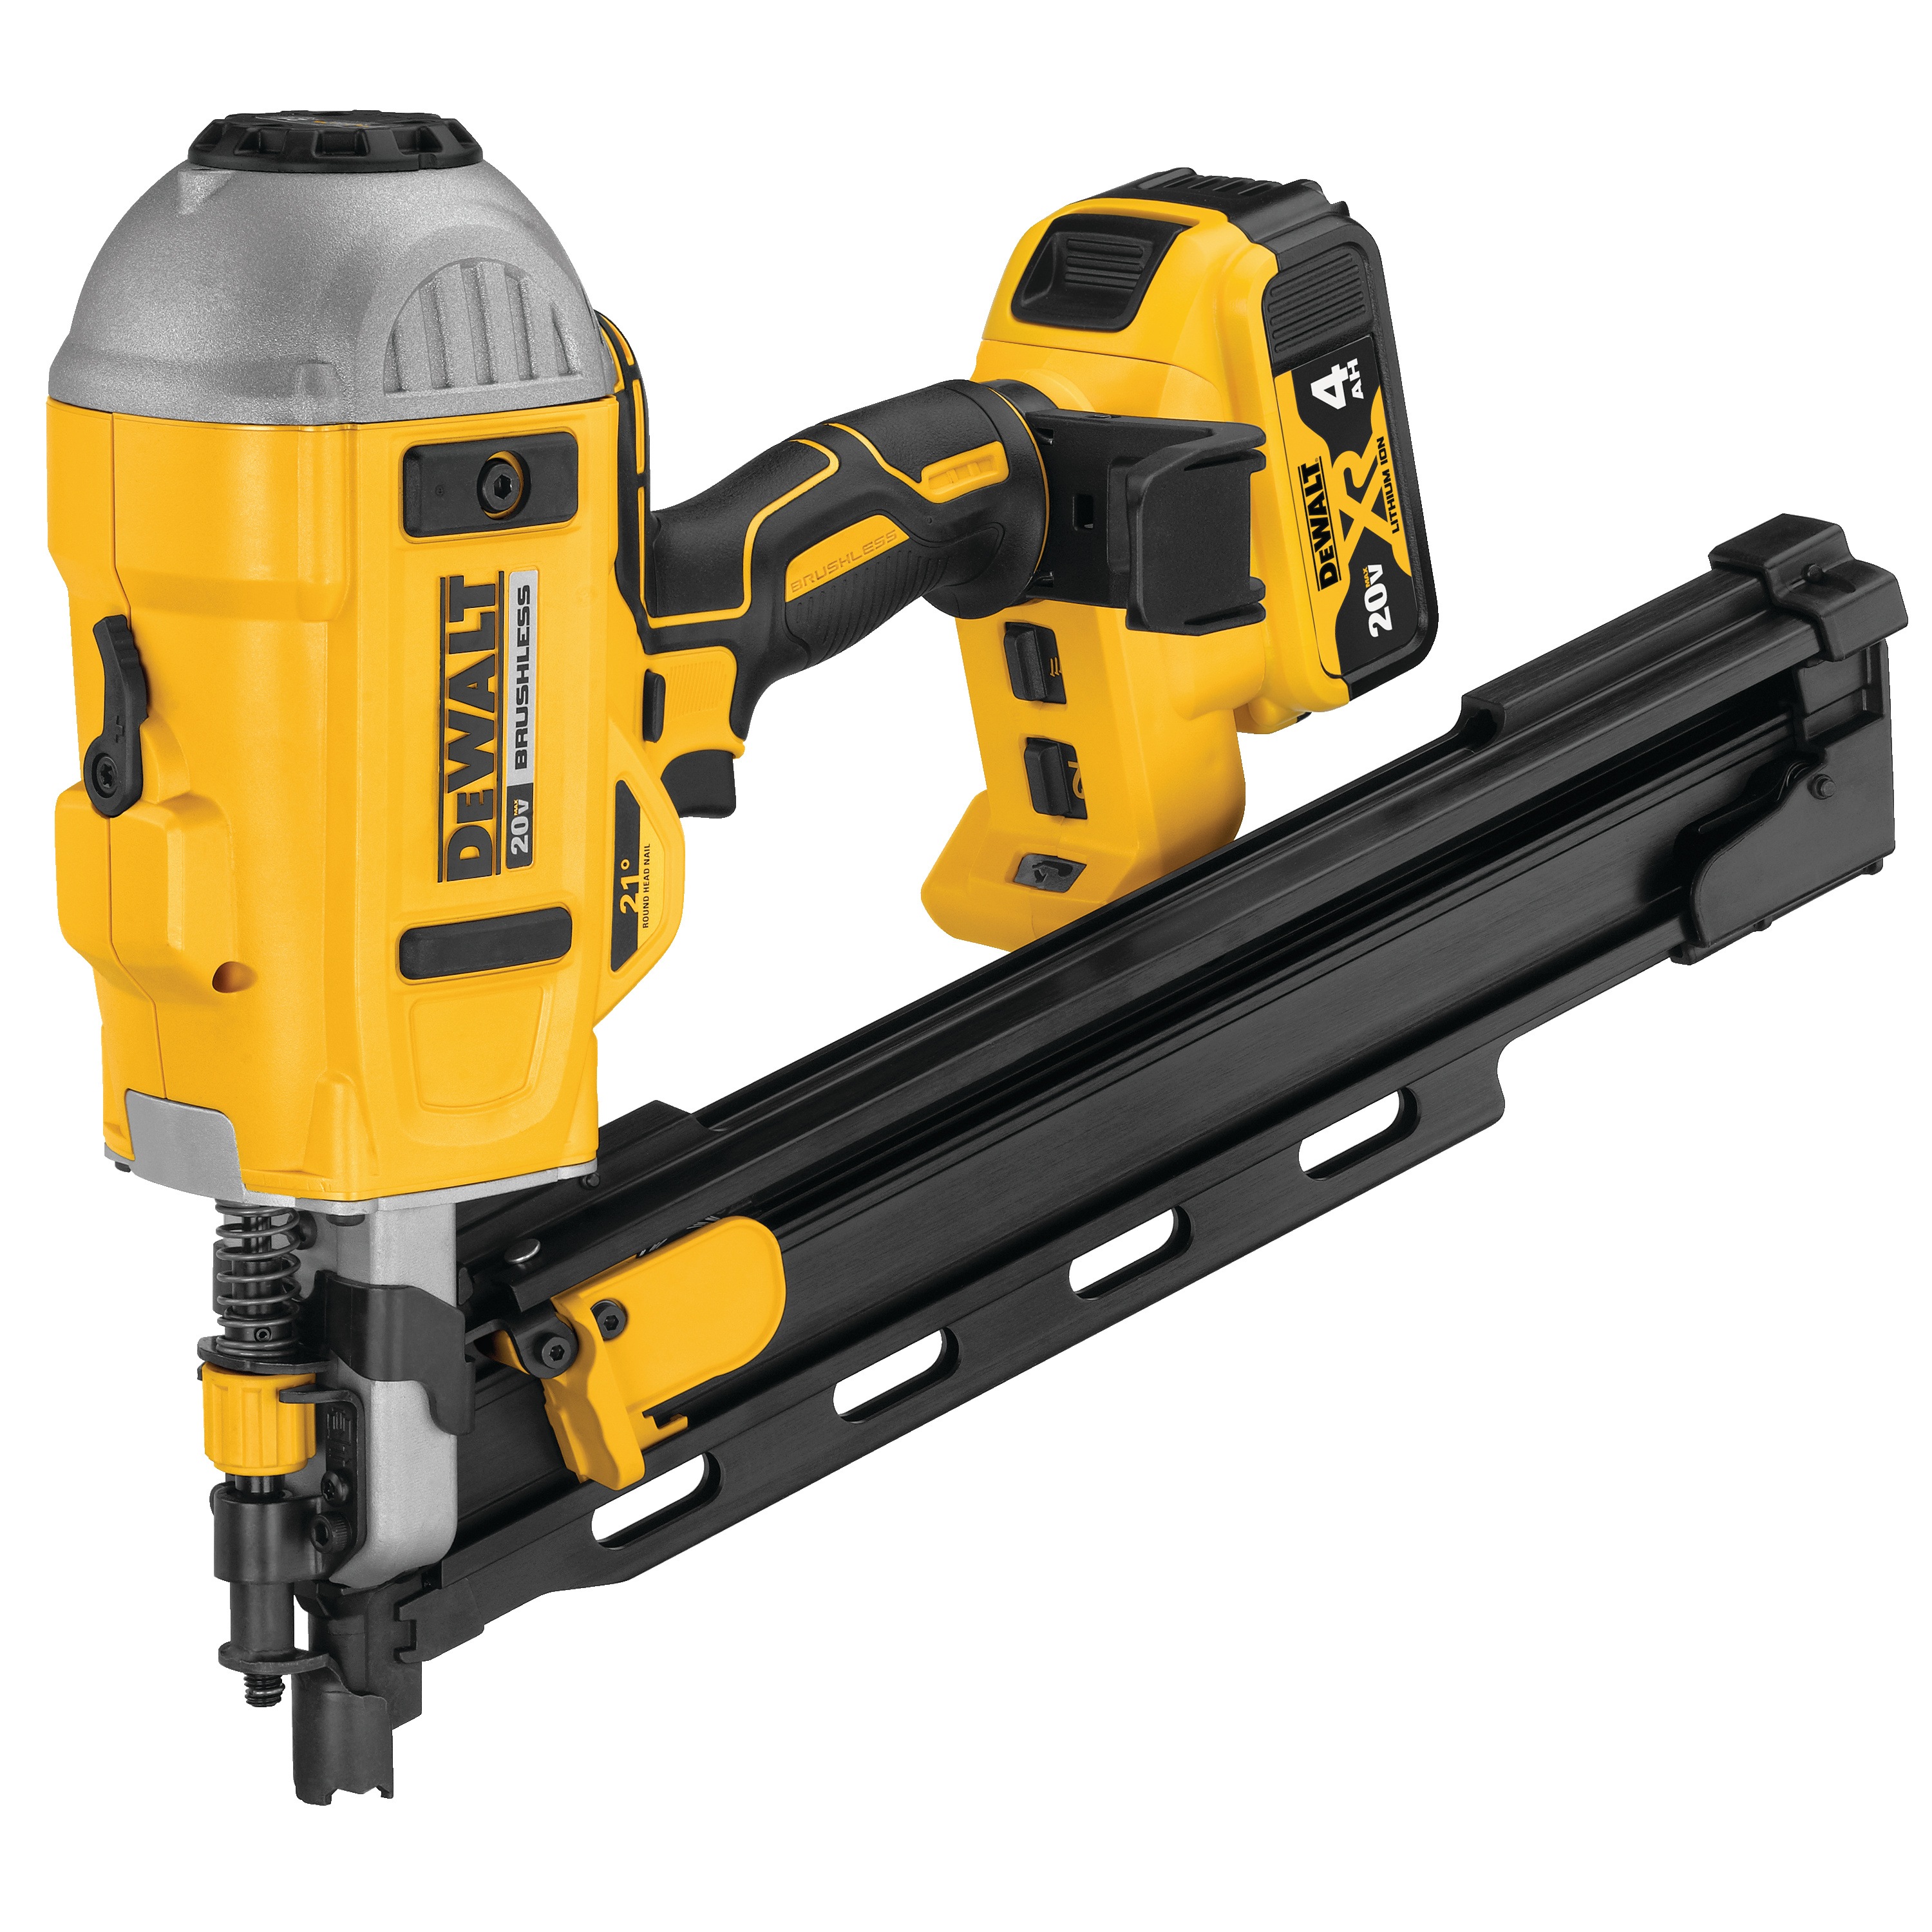 21 inch Plastic Collated Cordless Nailer